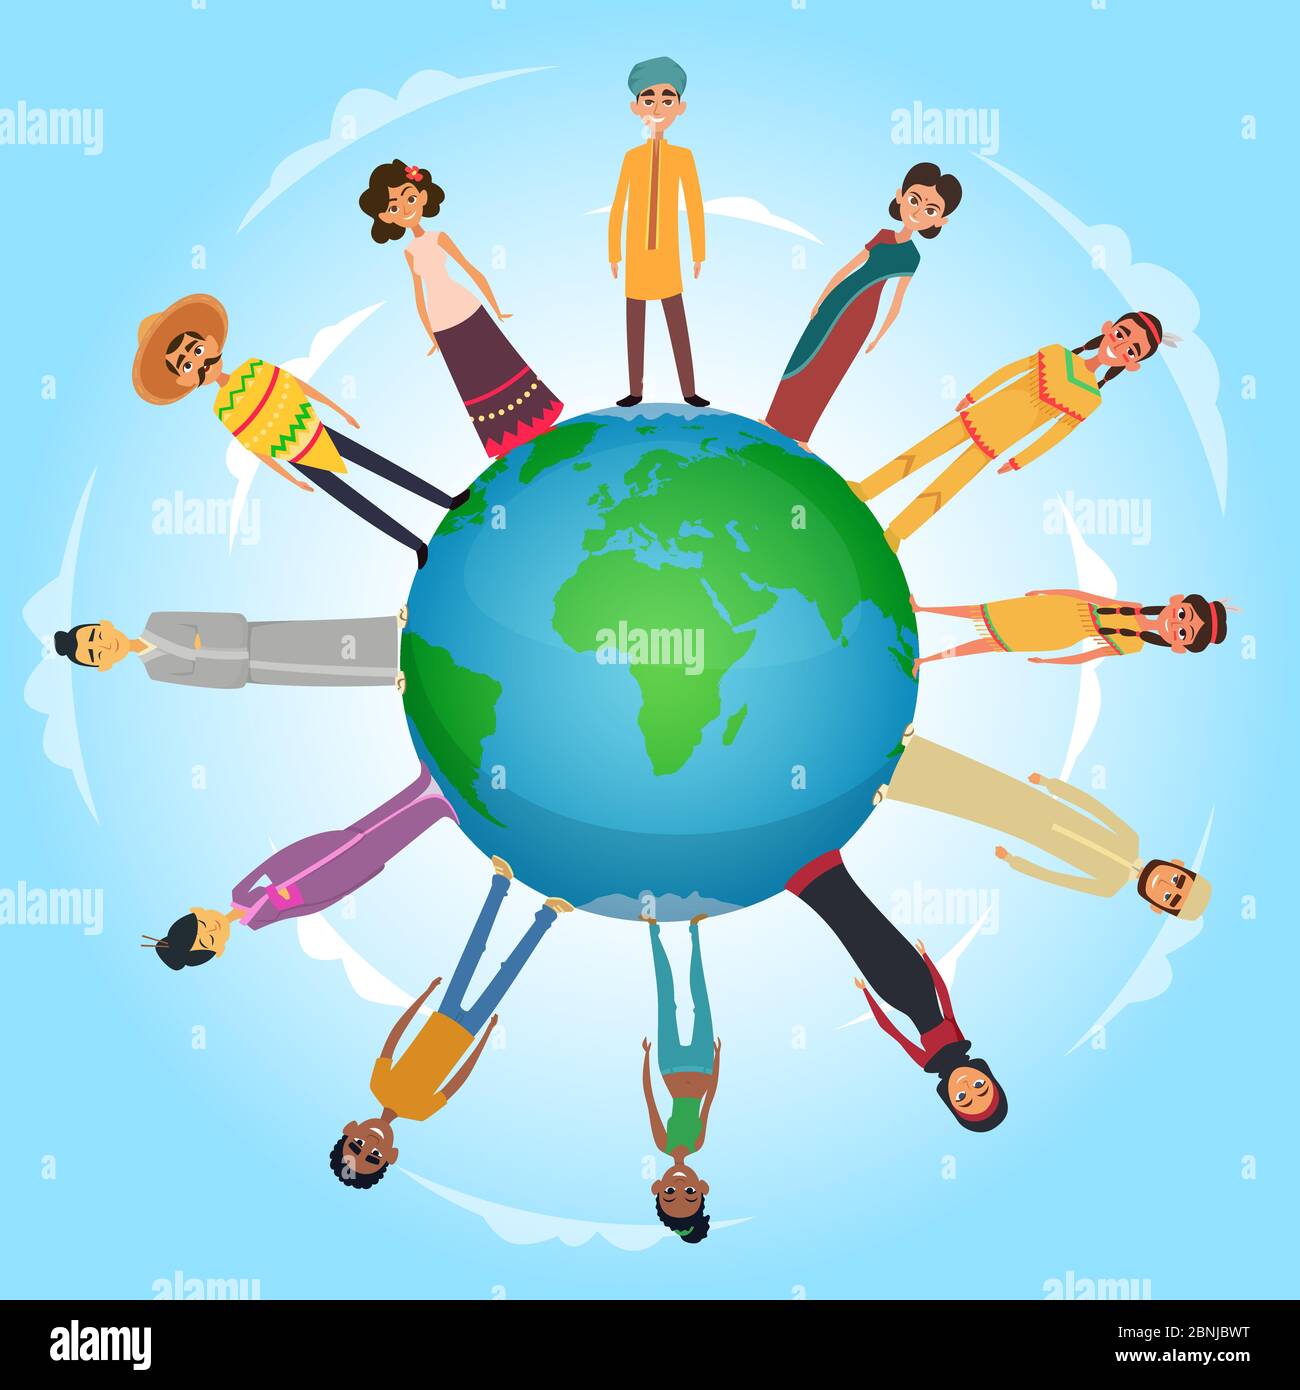 concept-illustration-with-international-peoples-male-and-female-standing-on-the-earth-planet